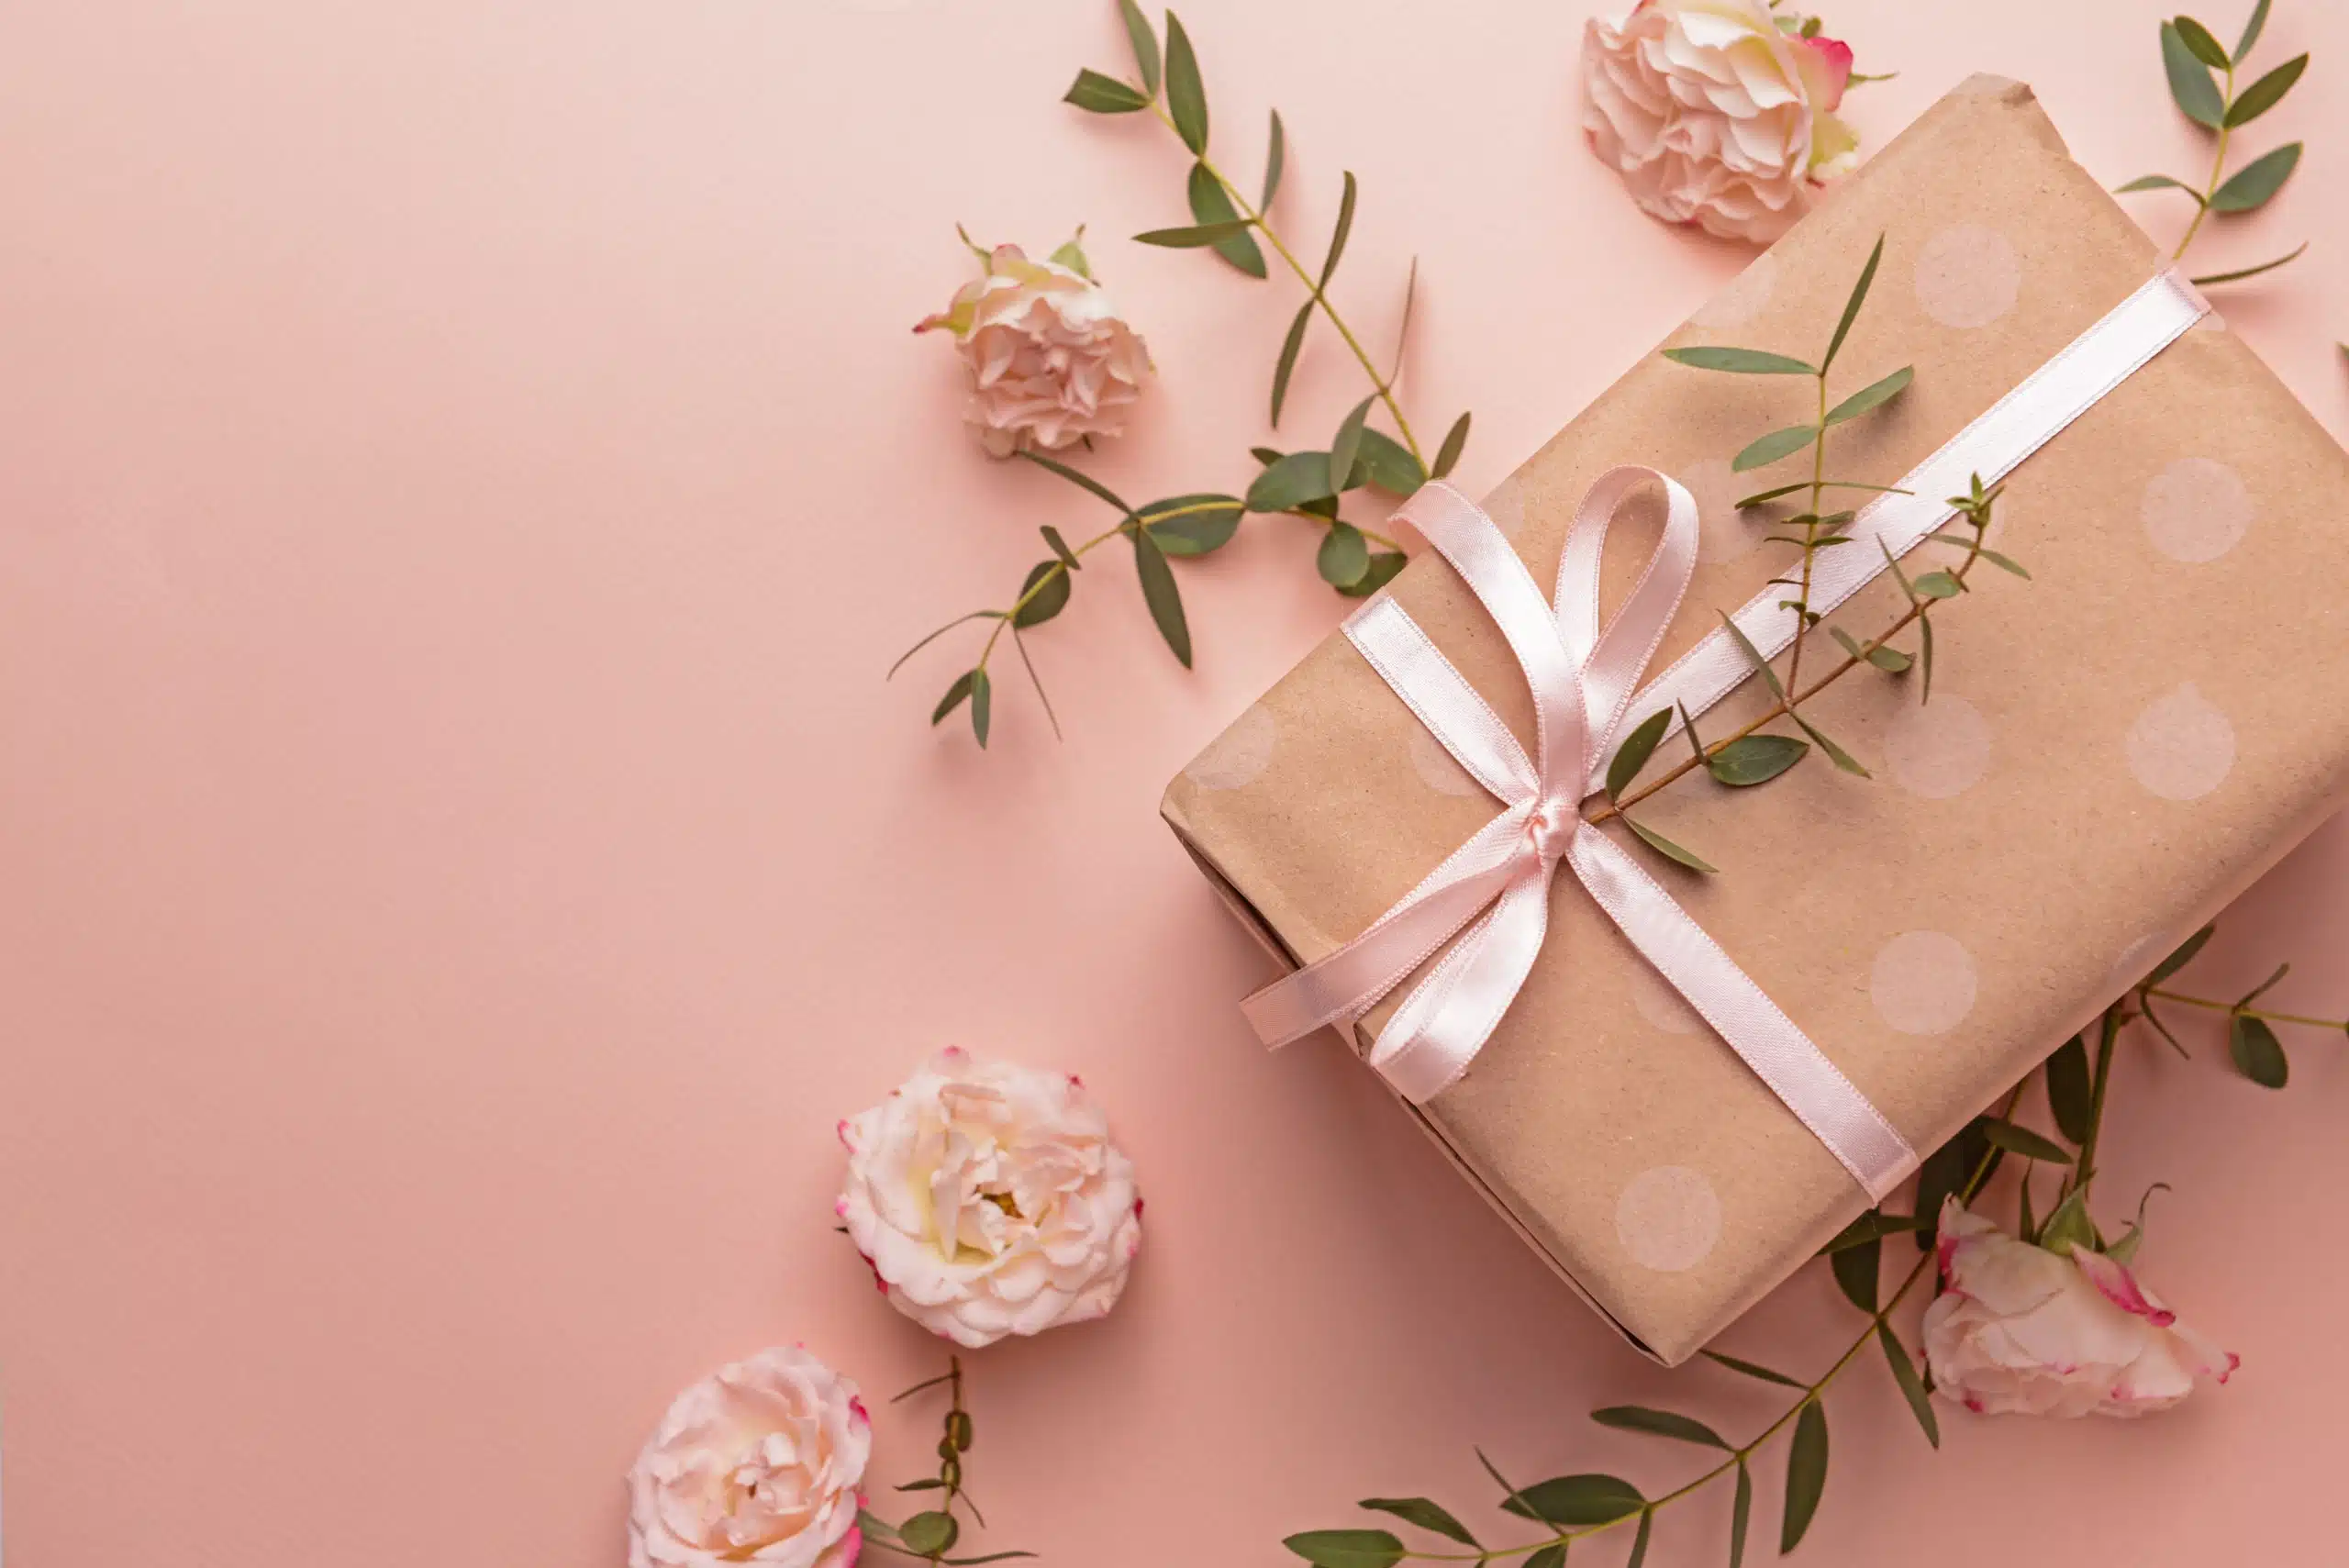 A gift box and beautiful flowers